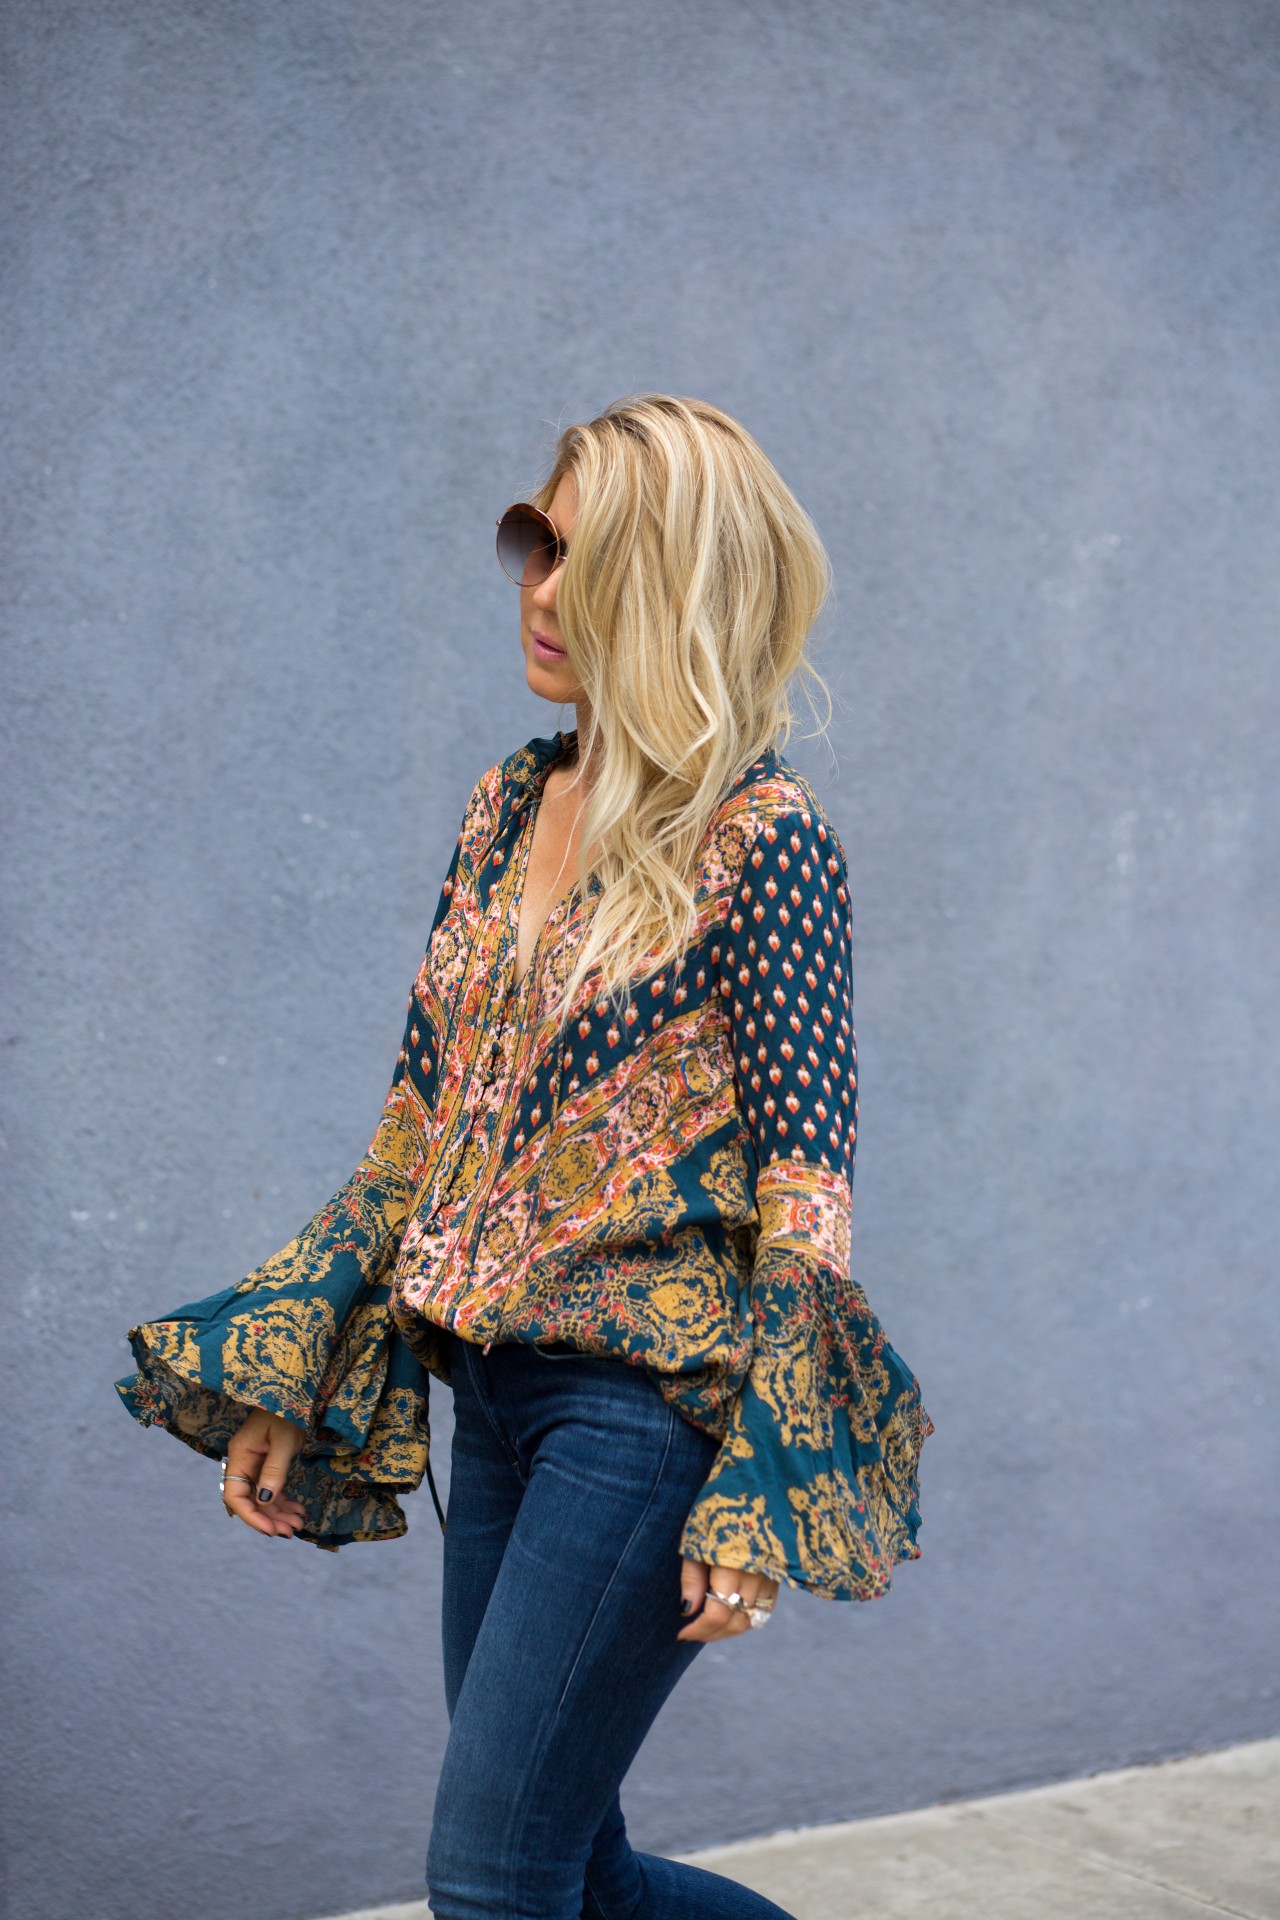 Lisa Allen of Lunchpails and Lipstick wearing a free people floral tunic with citizen of humanity jeans and chanel loafers